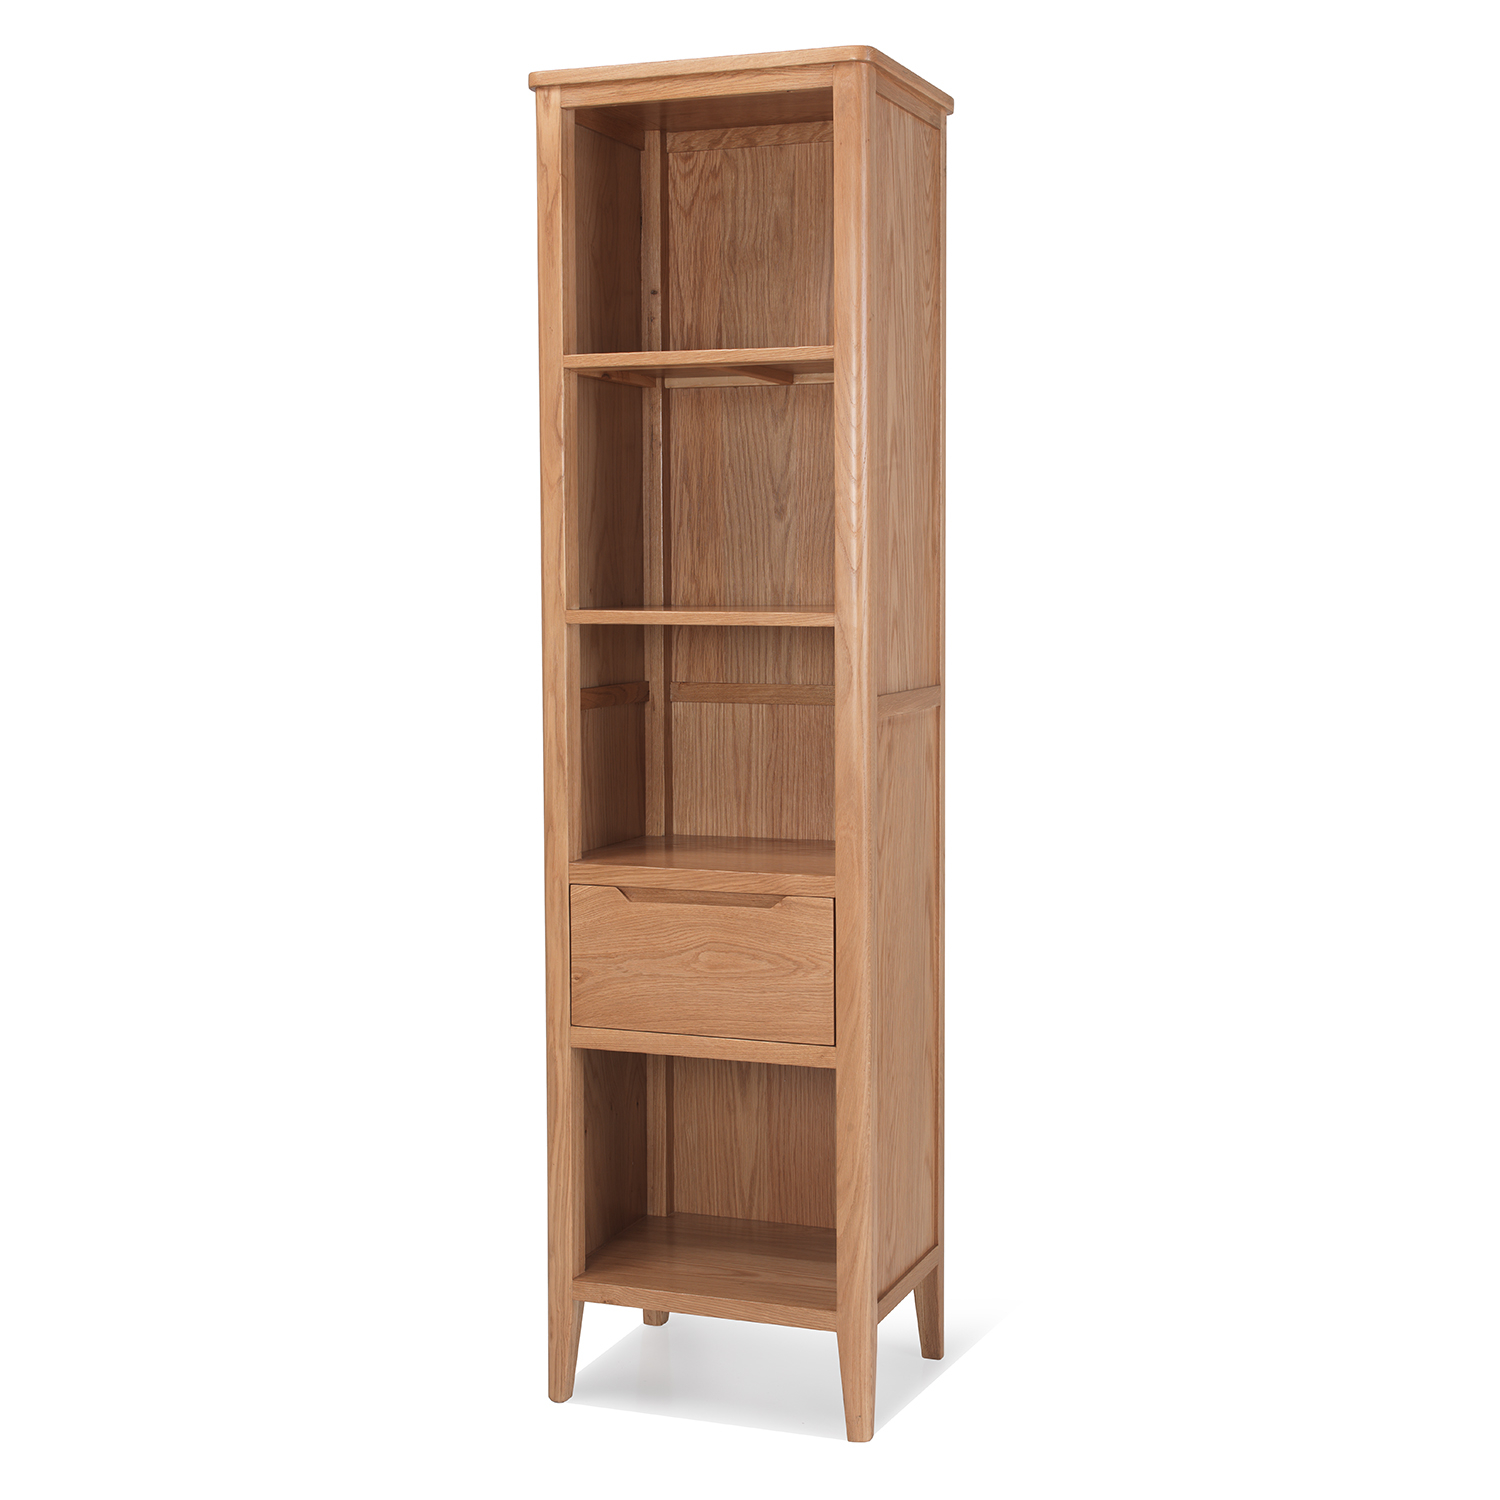 Nappa Oak Slim Tall Bookcase With Drawer with regard to sizing 1500 X 1500